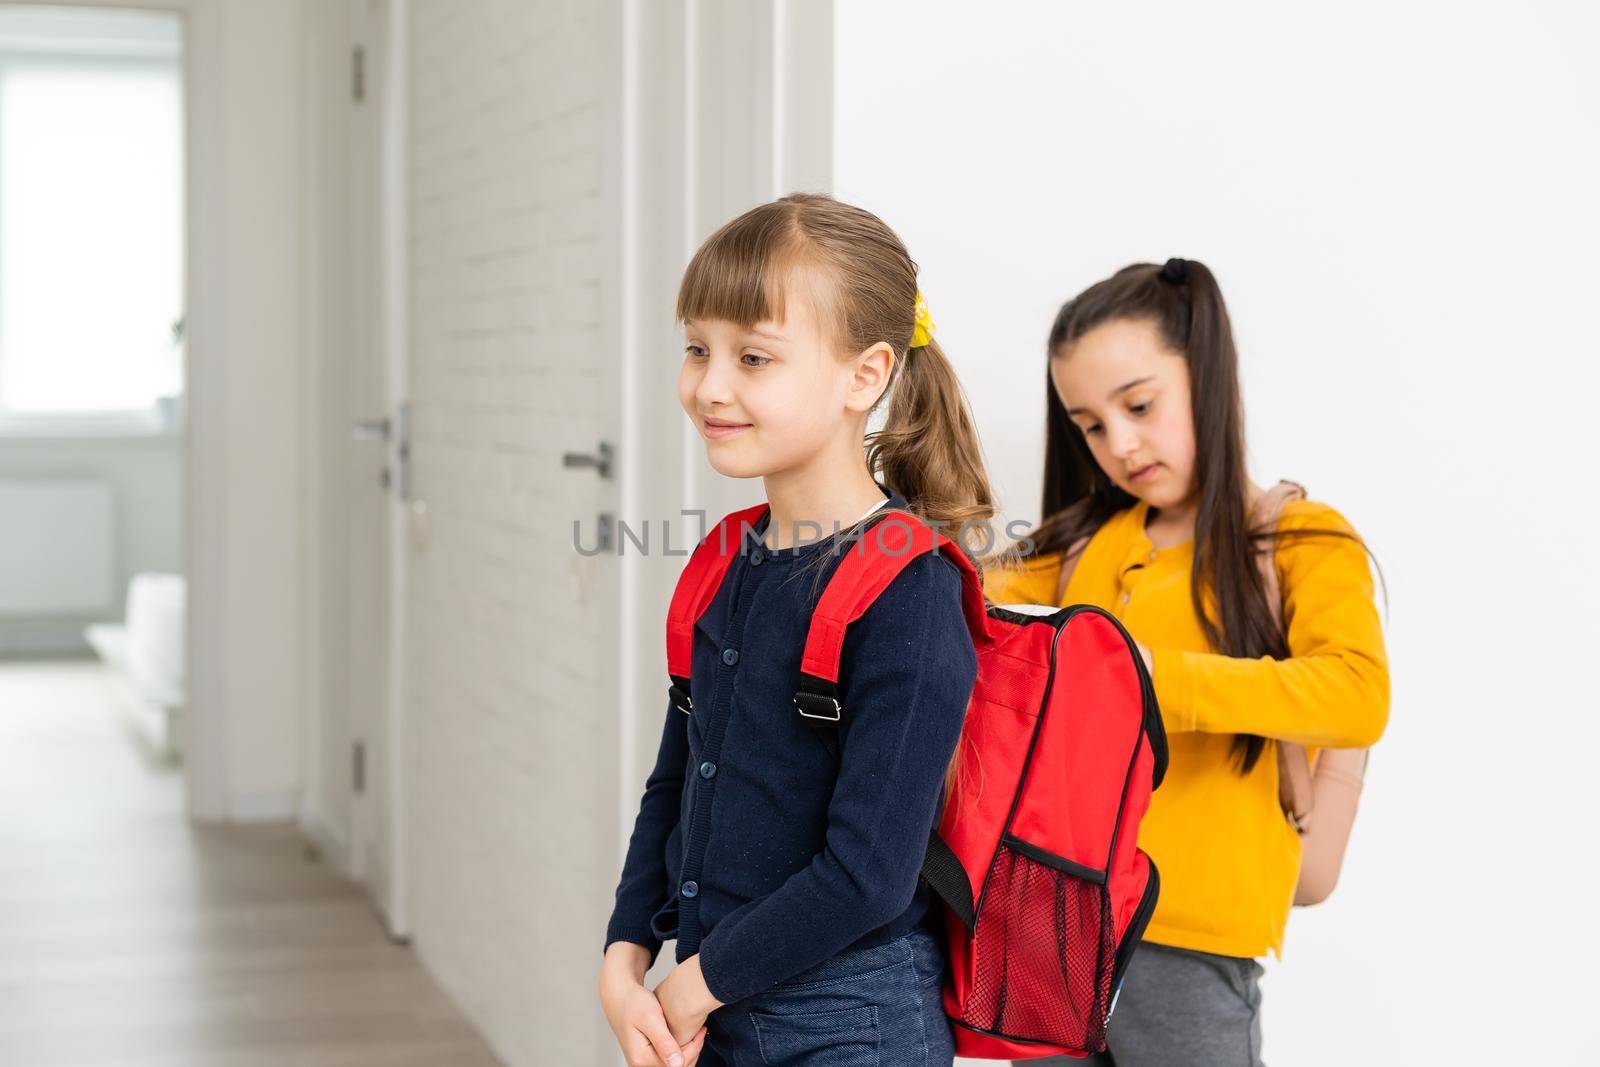 Two pupils of elementary school, Back to school